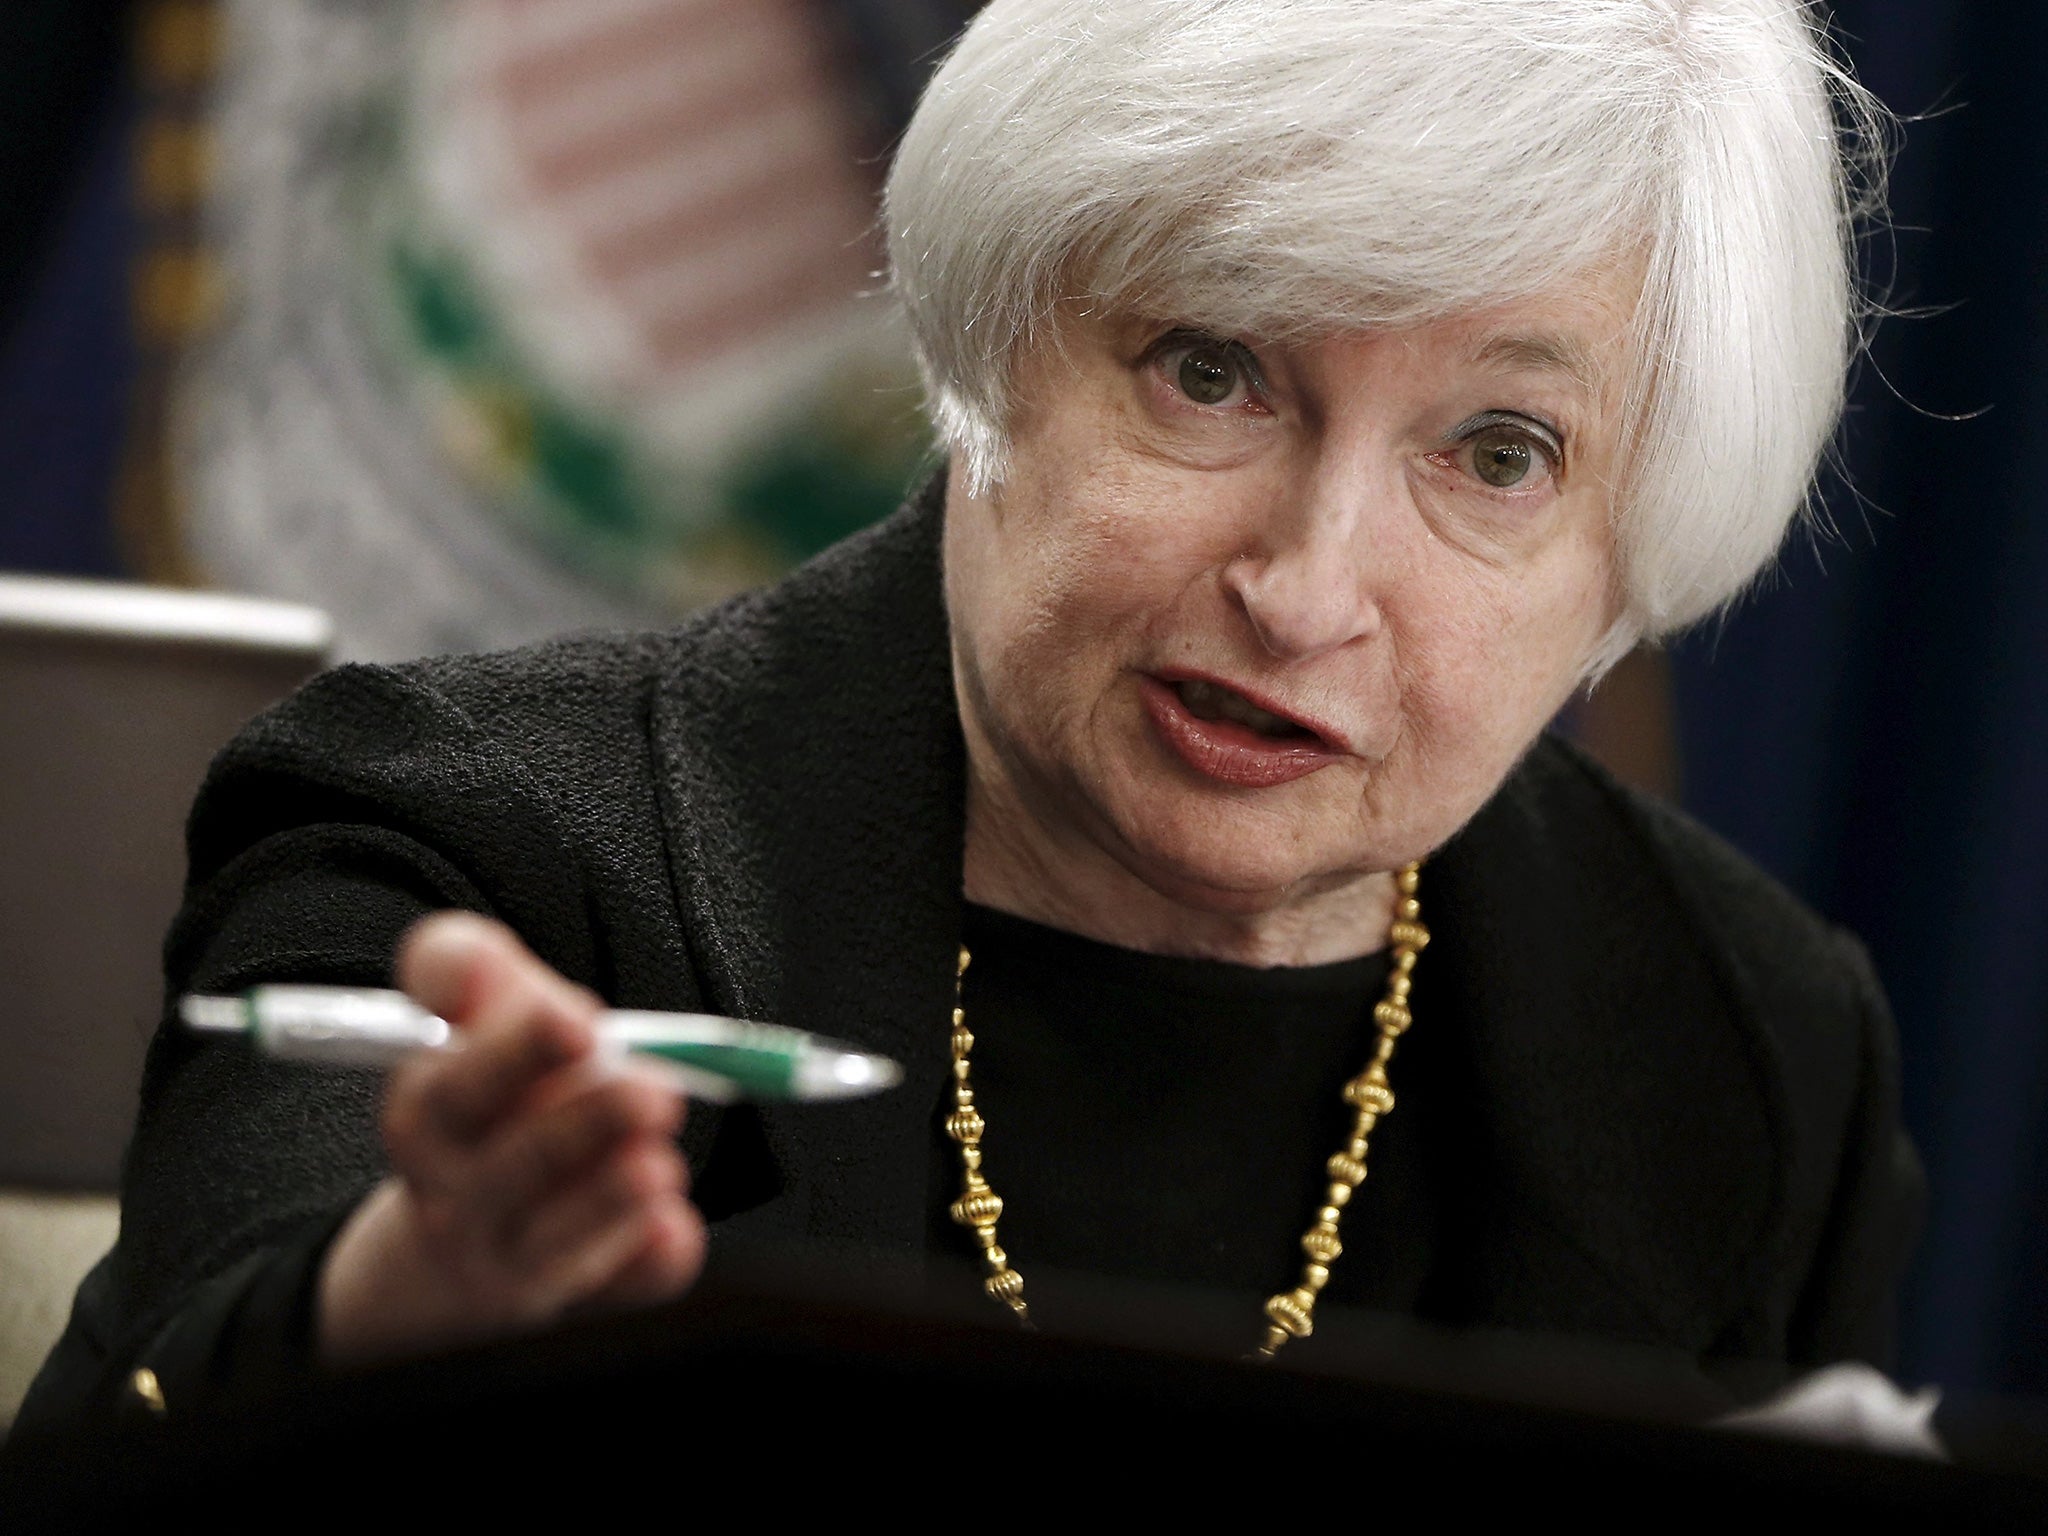 The Fed chair Janet Yellen said the US was strong enough to fend off the recent turmoil